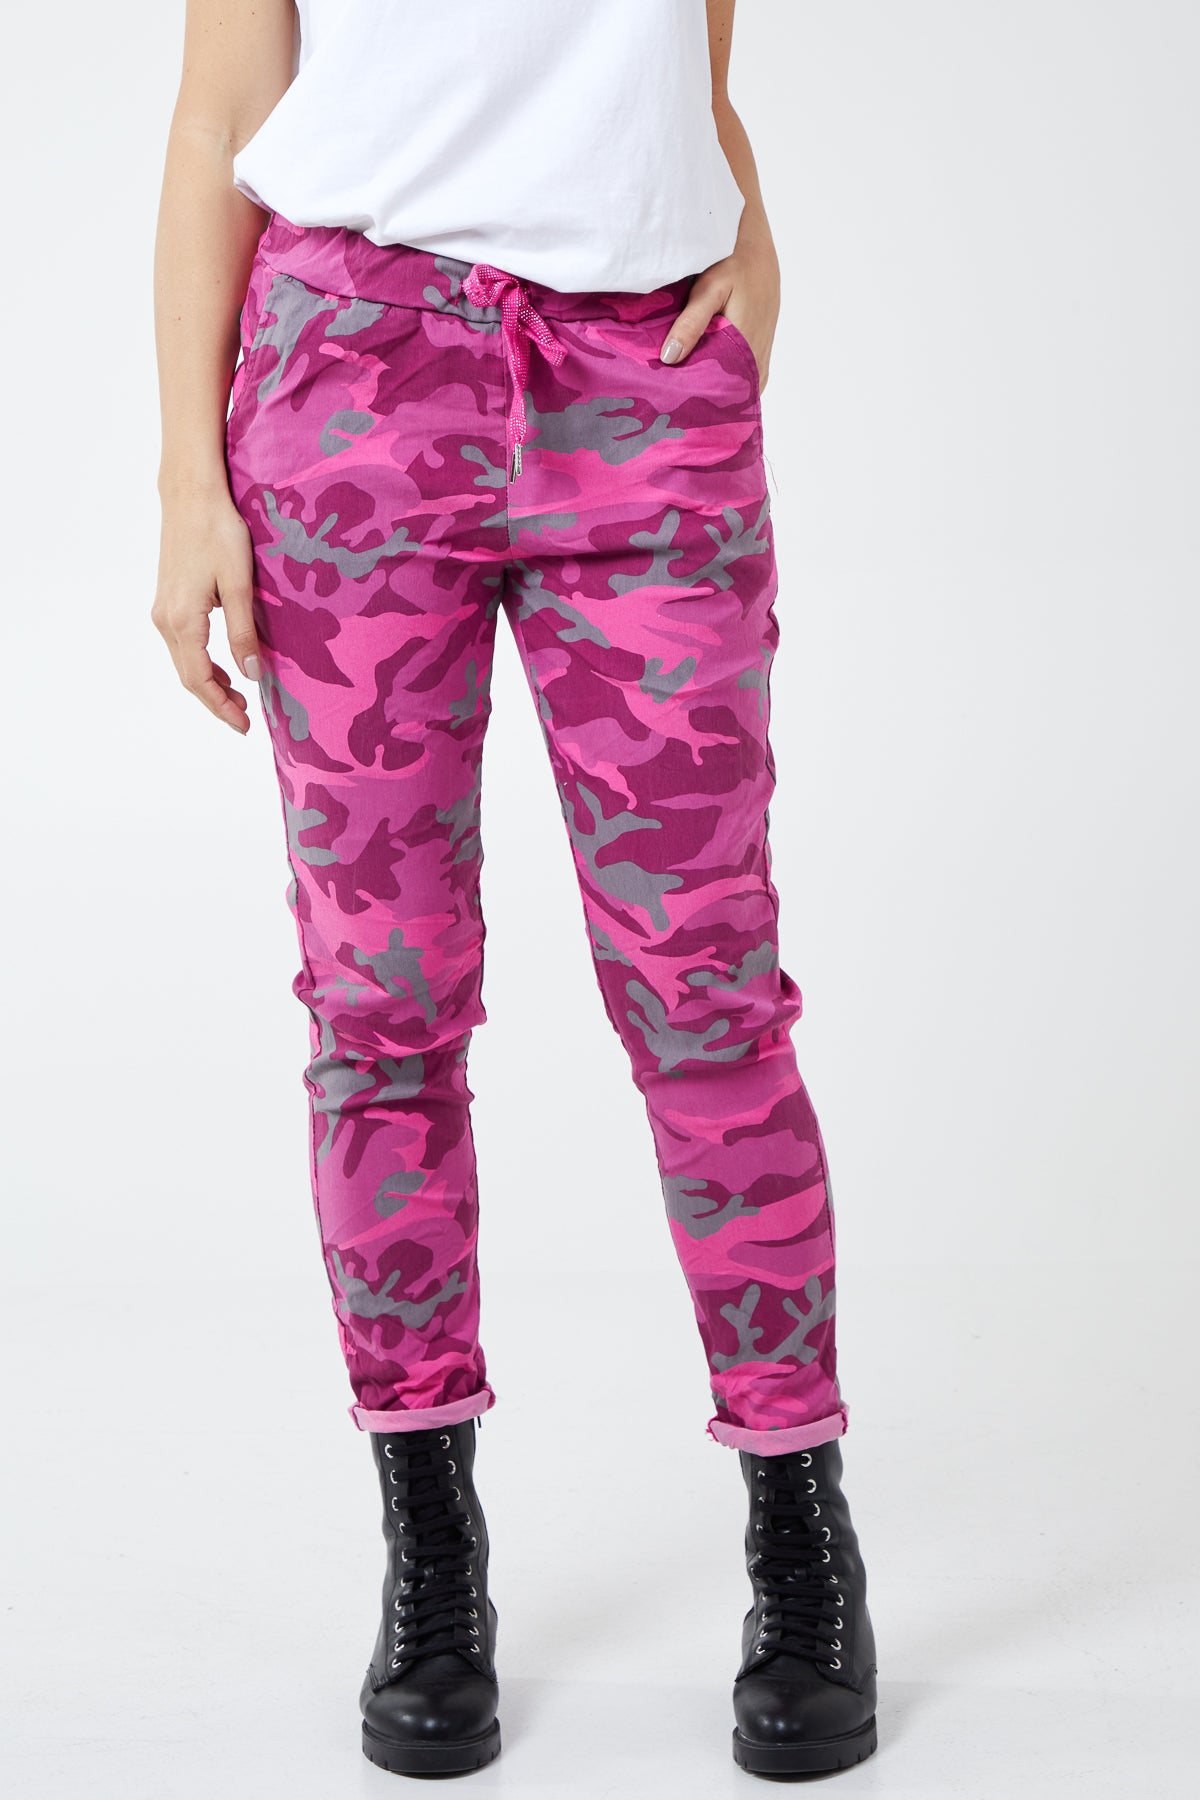 Plus Size Pink Camouflage Print Stretchy Magic Trousers  Boutique Store   SilkFred